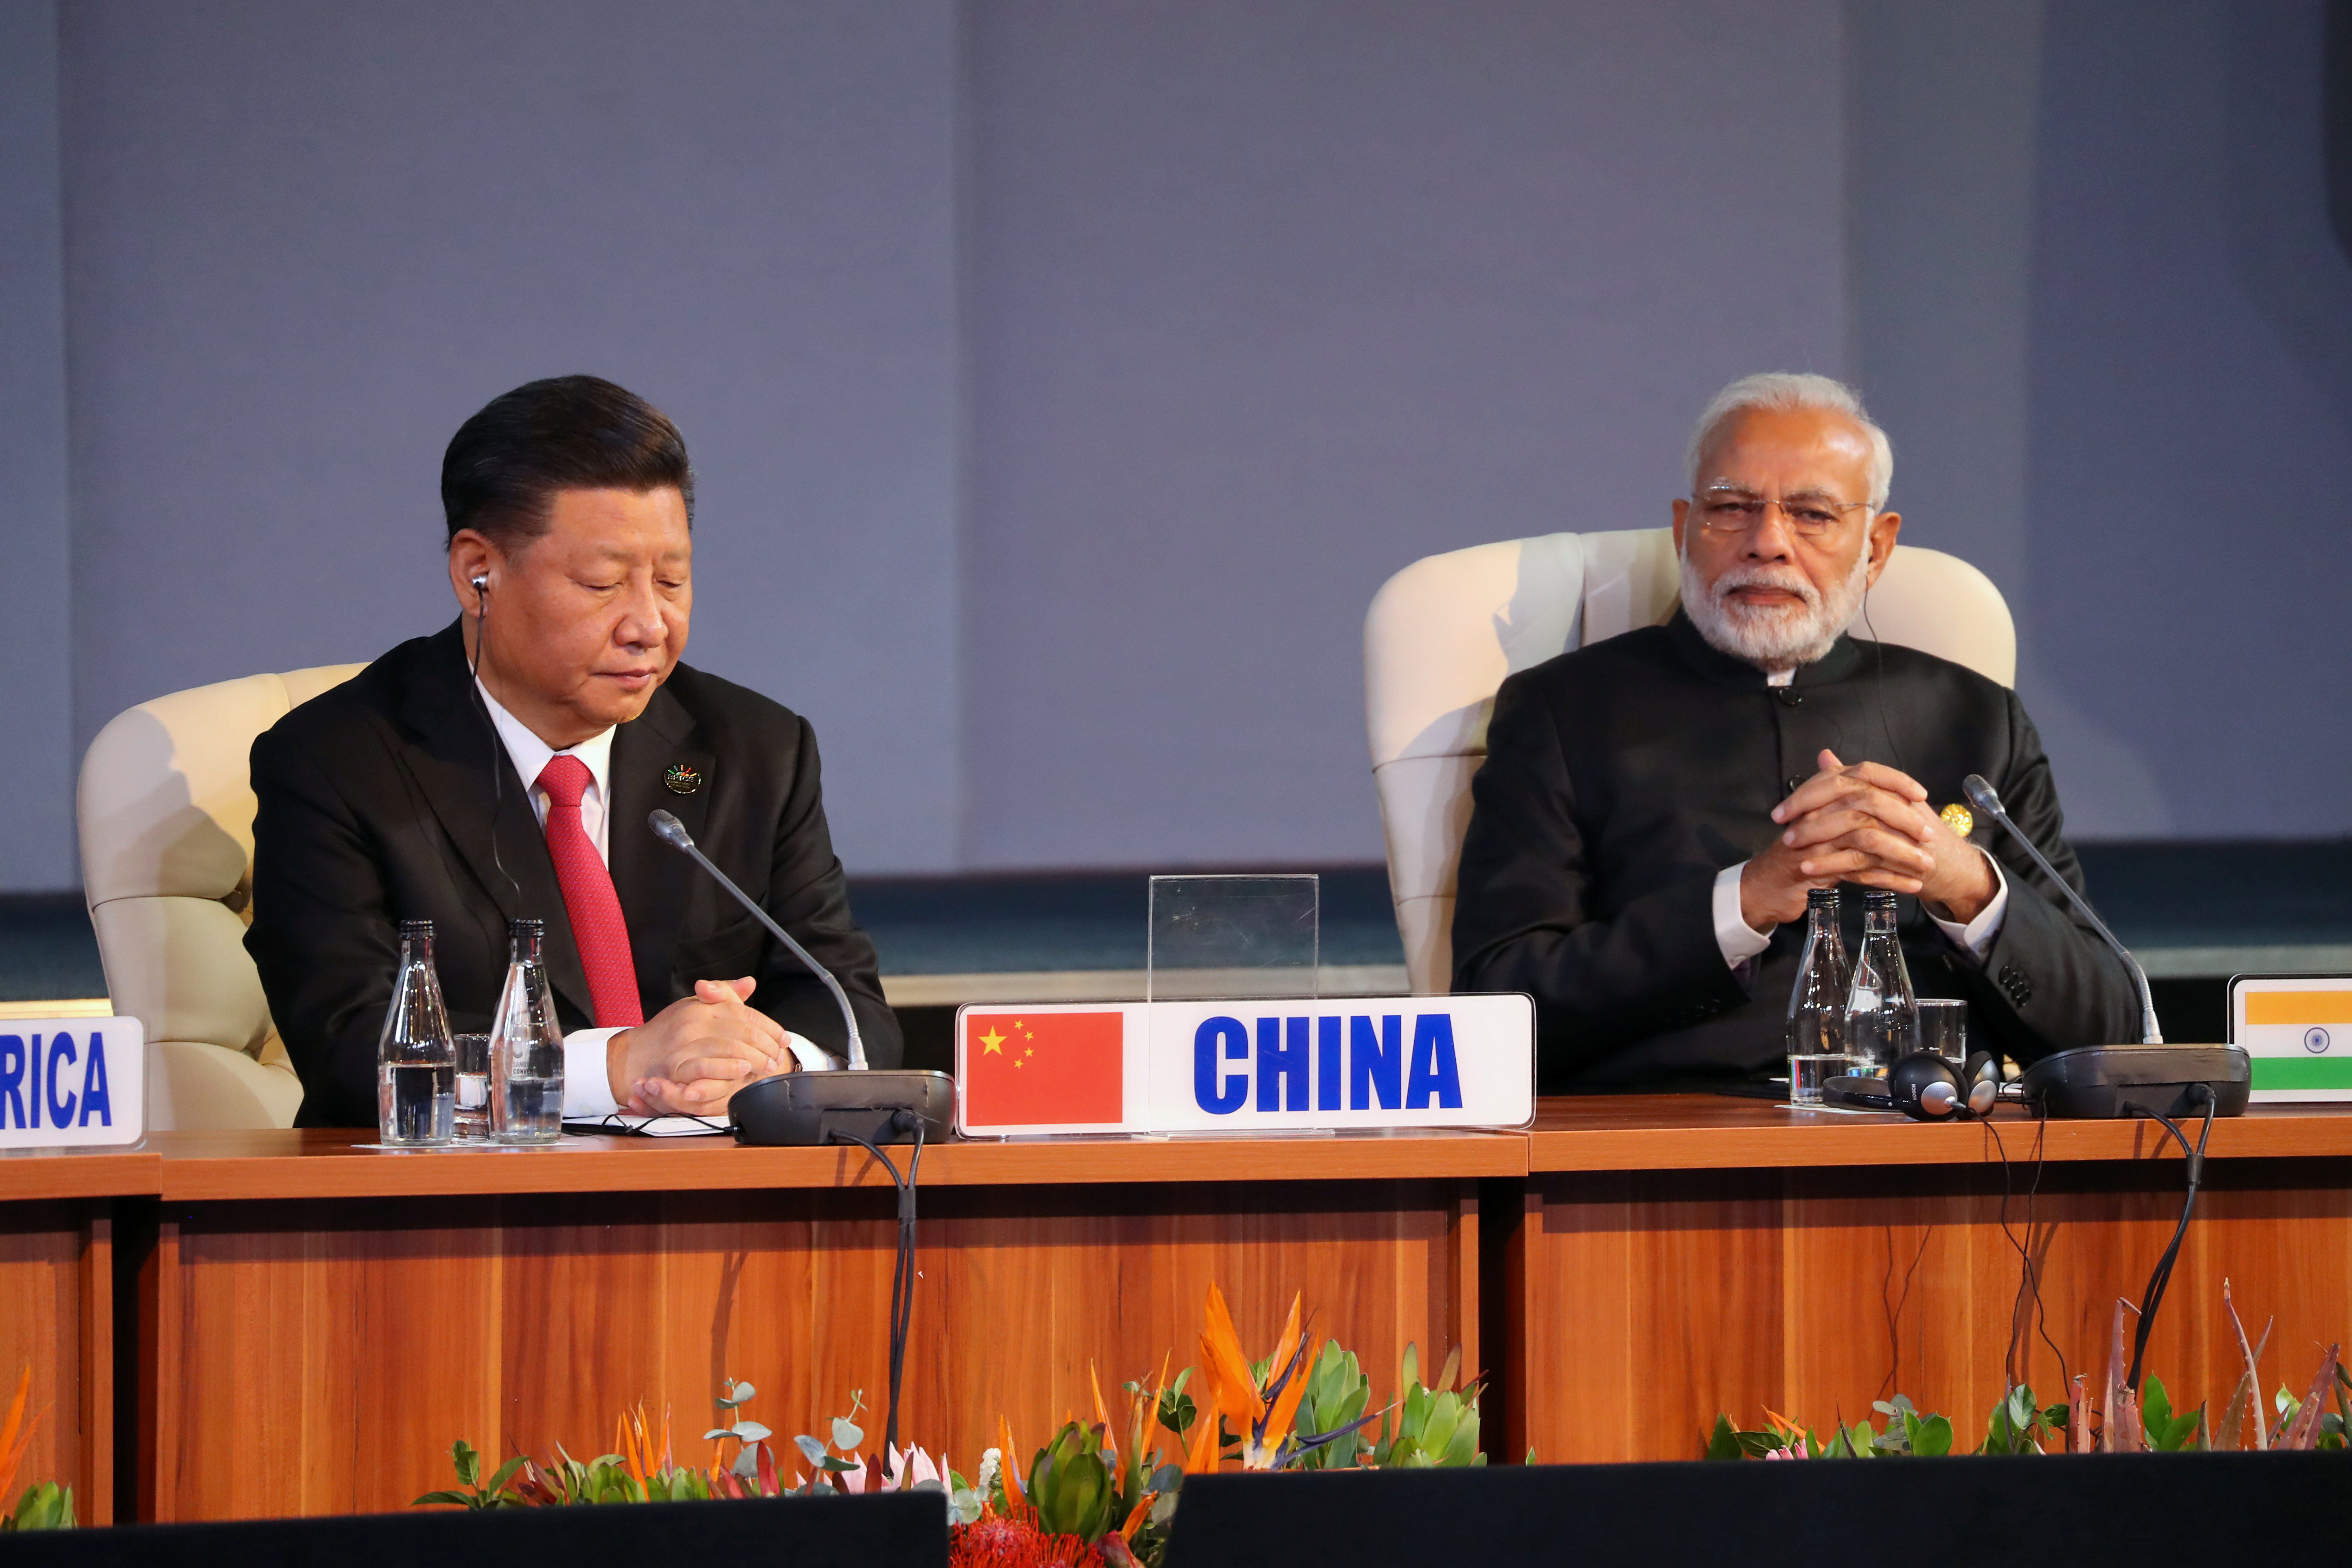 Indian Prime Minister Narendra Modi and China's President Xi Jinping attend the BRICS summit meeting in Johannesburg